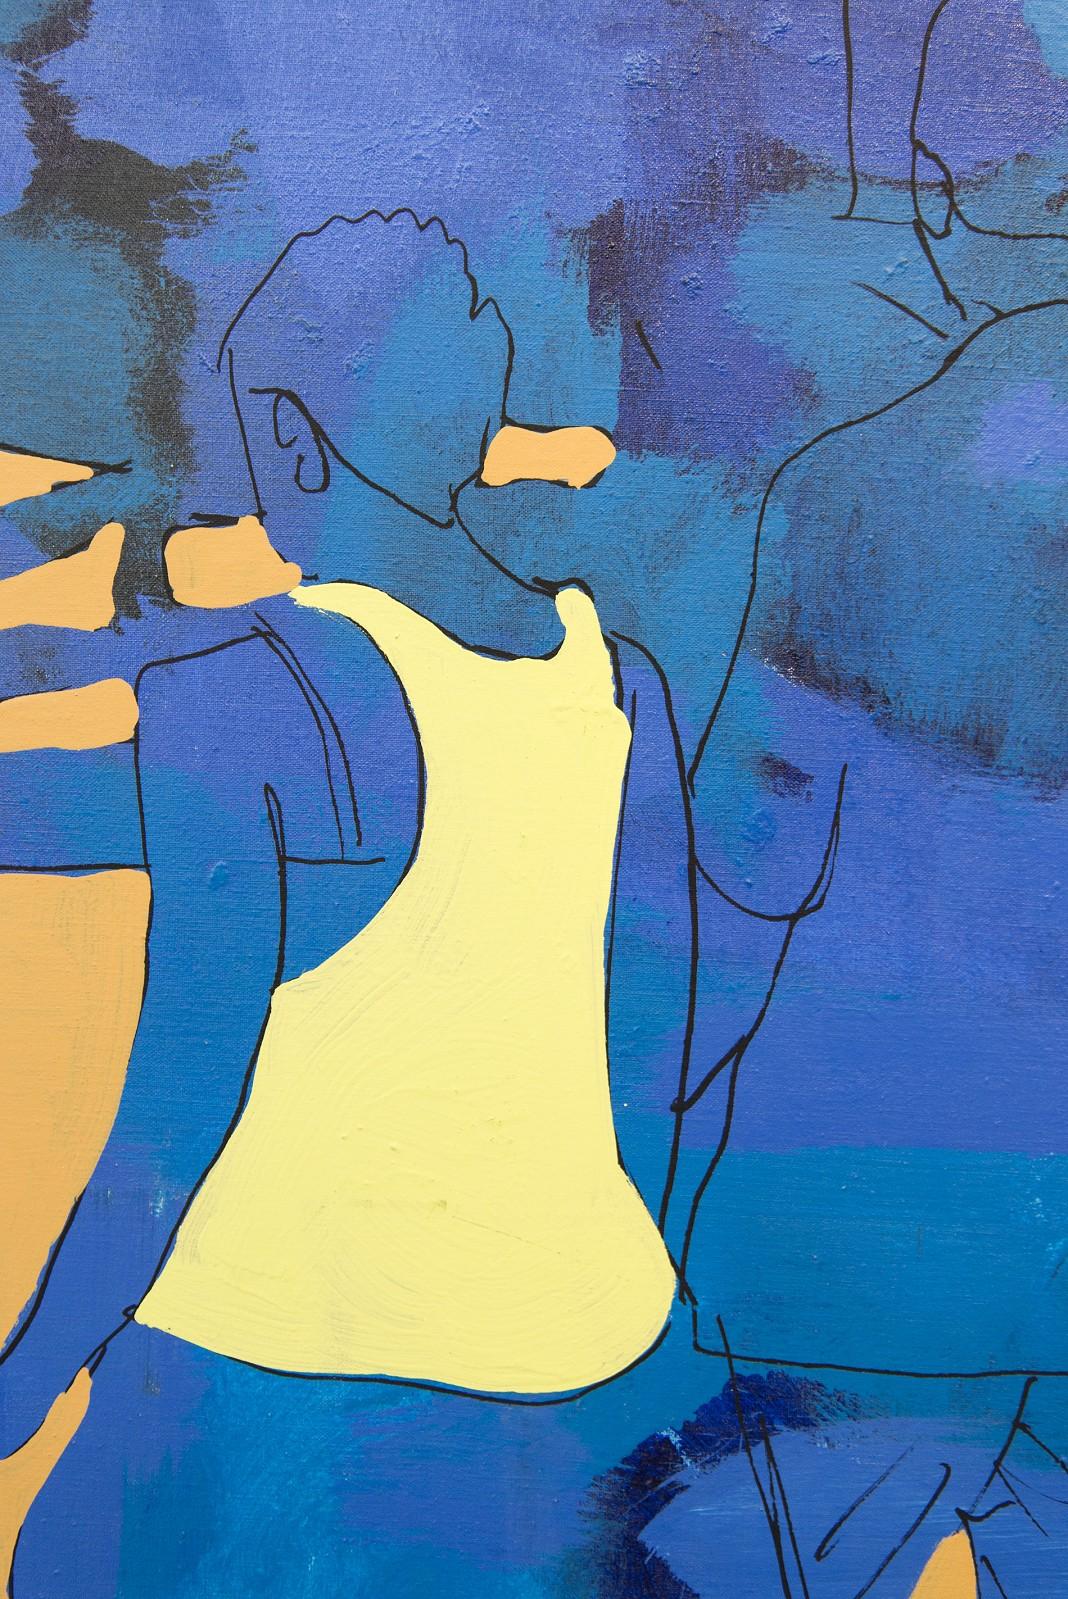 Blazing Blue - large, graphic, figurative, pop-art, acrylic on canvas - Contemporary Painting by Viktor Mitic